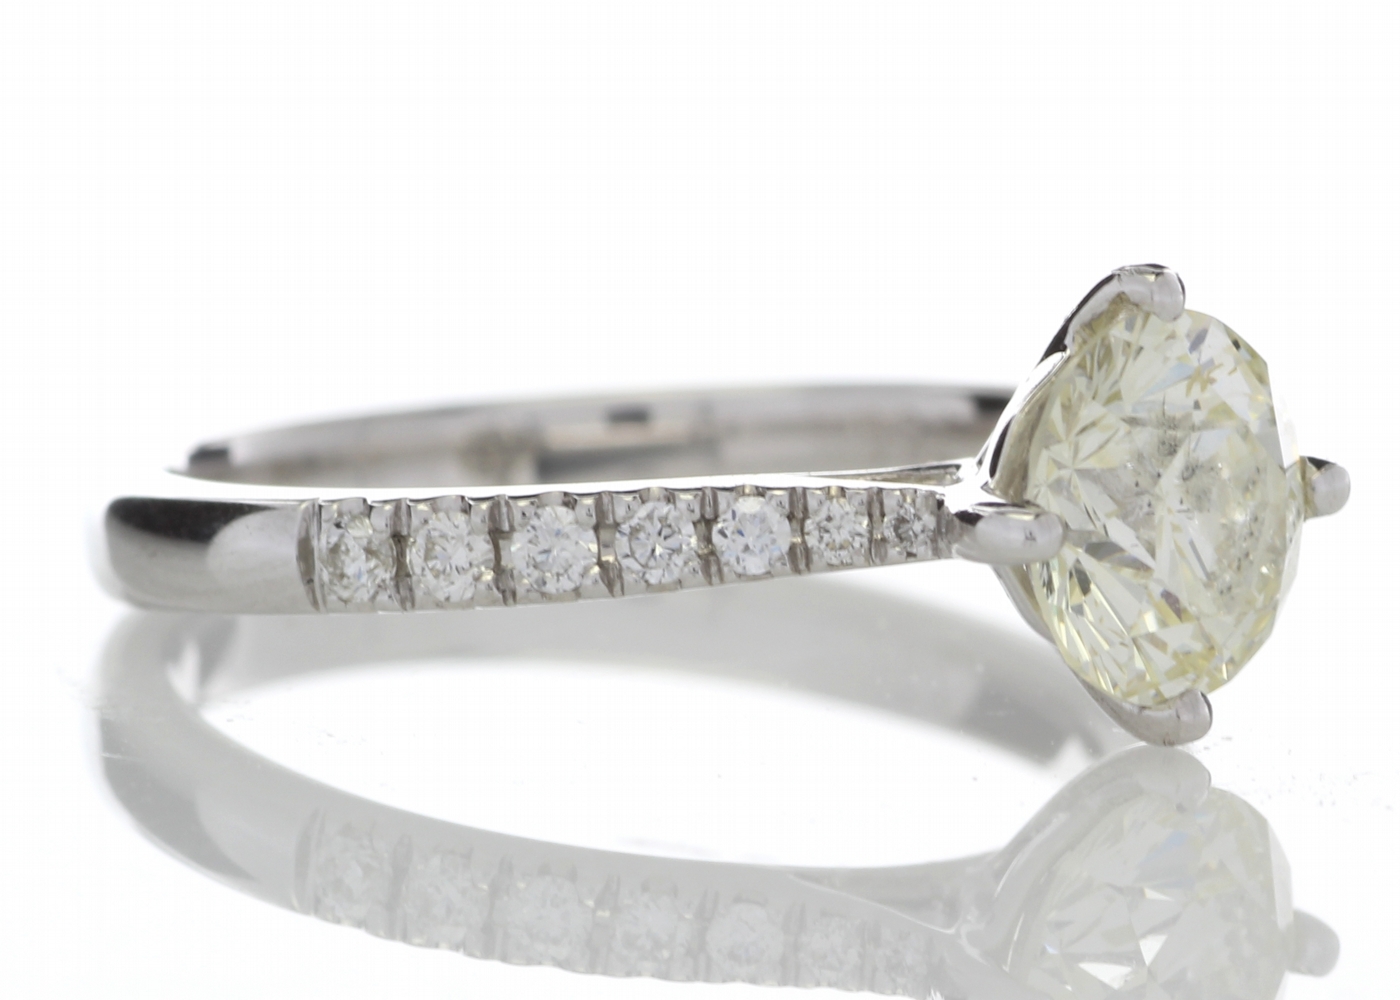 18ct White Gold Solitaire Diamond Ring With Stone Set Shoulders (1.15) 1.30 Carats - Image 2 of 5